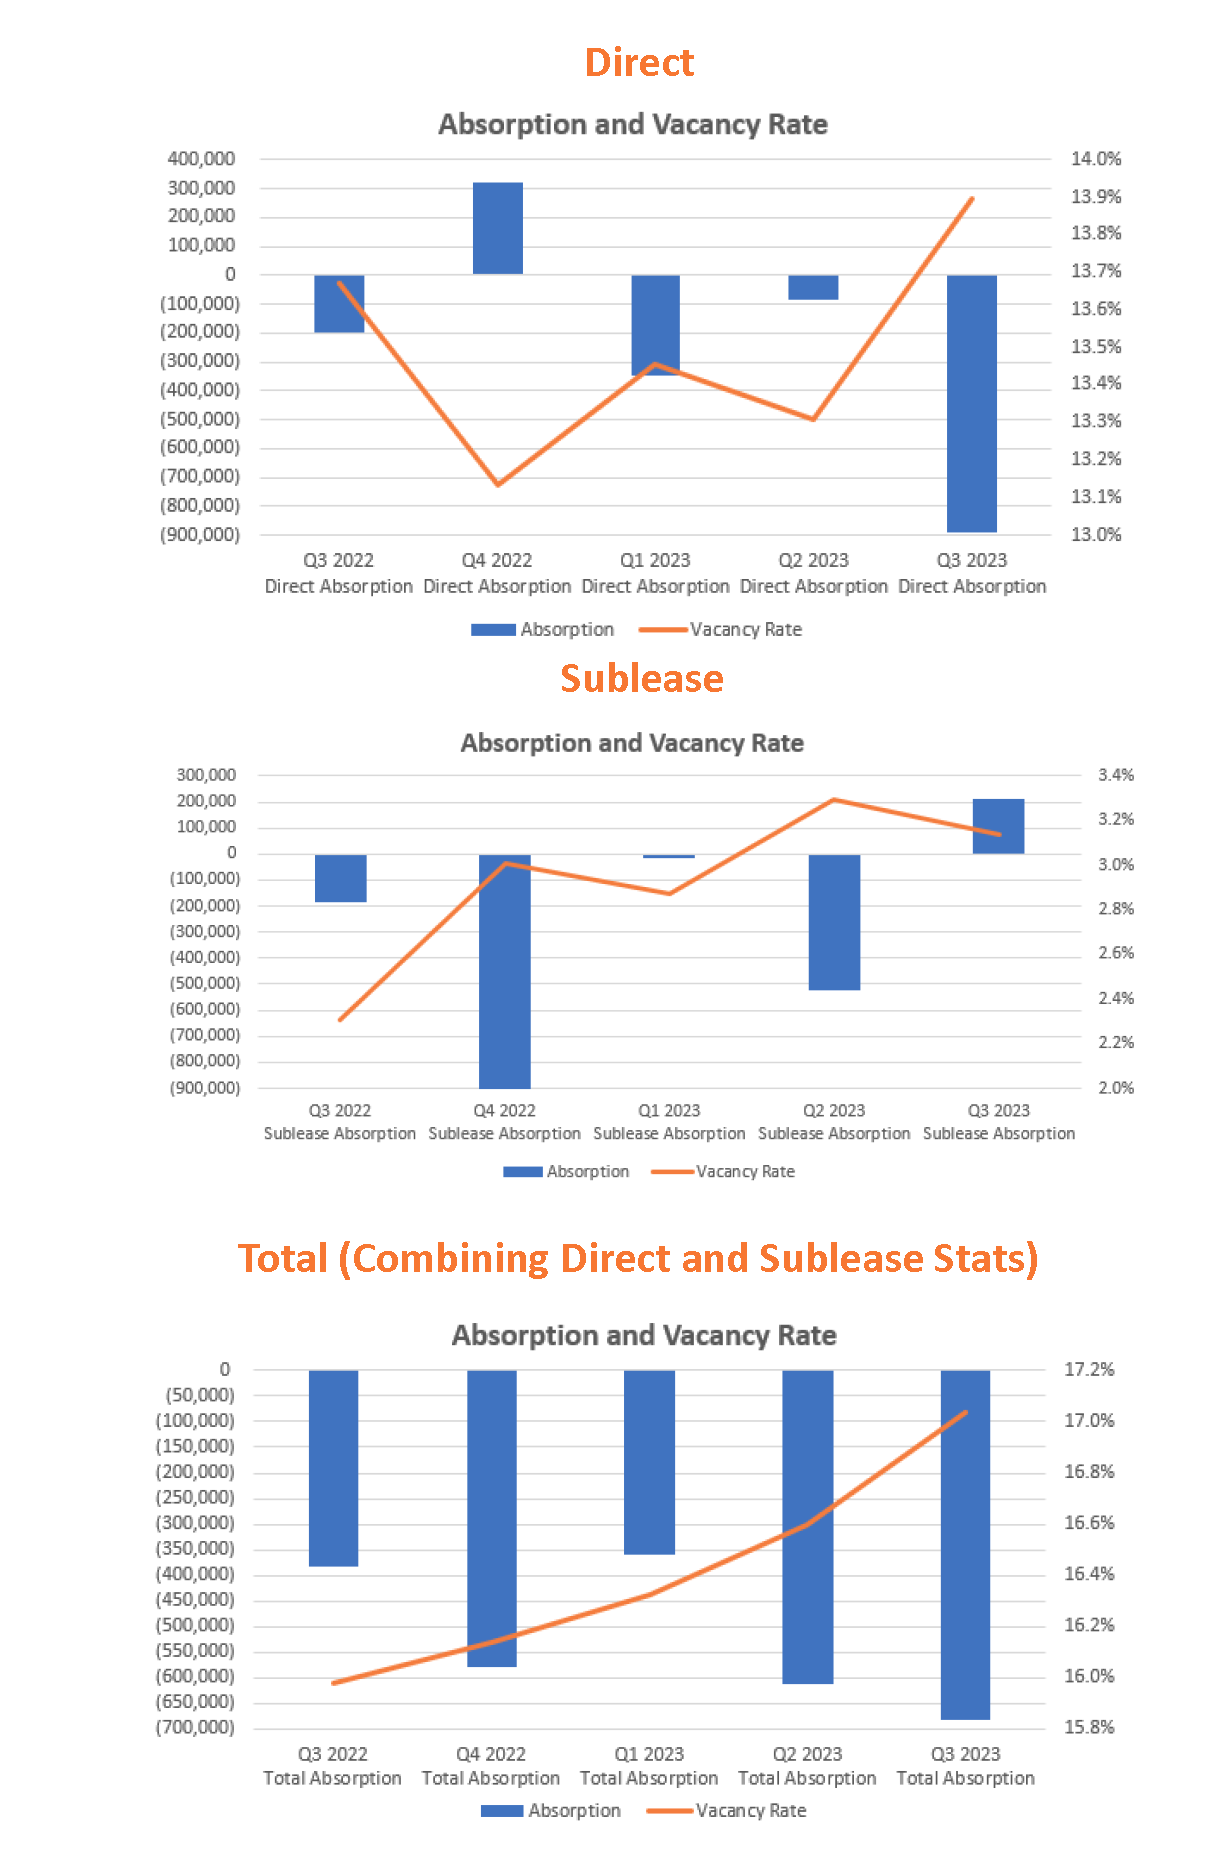 Q1 2023 Mpls-St Paul Office Absorption & Vacancy Rate